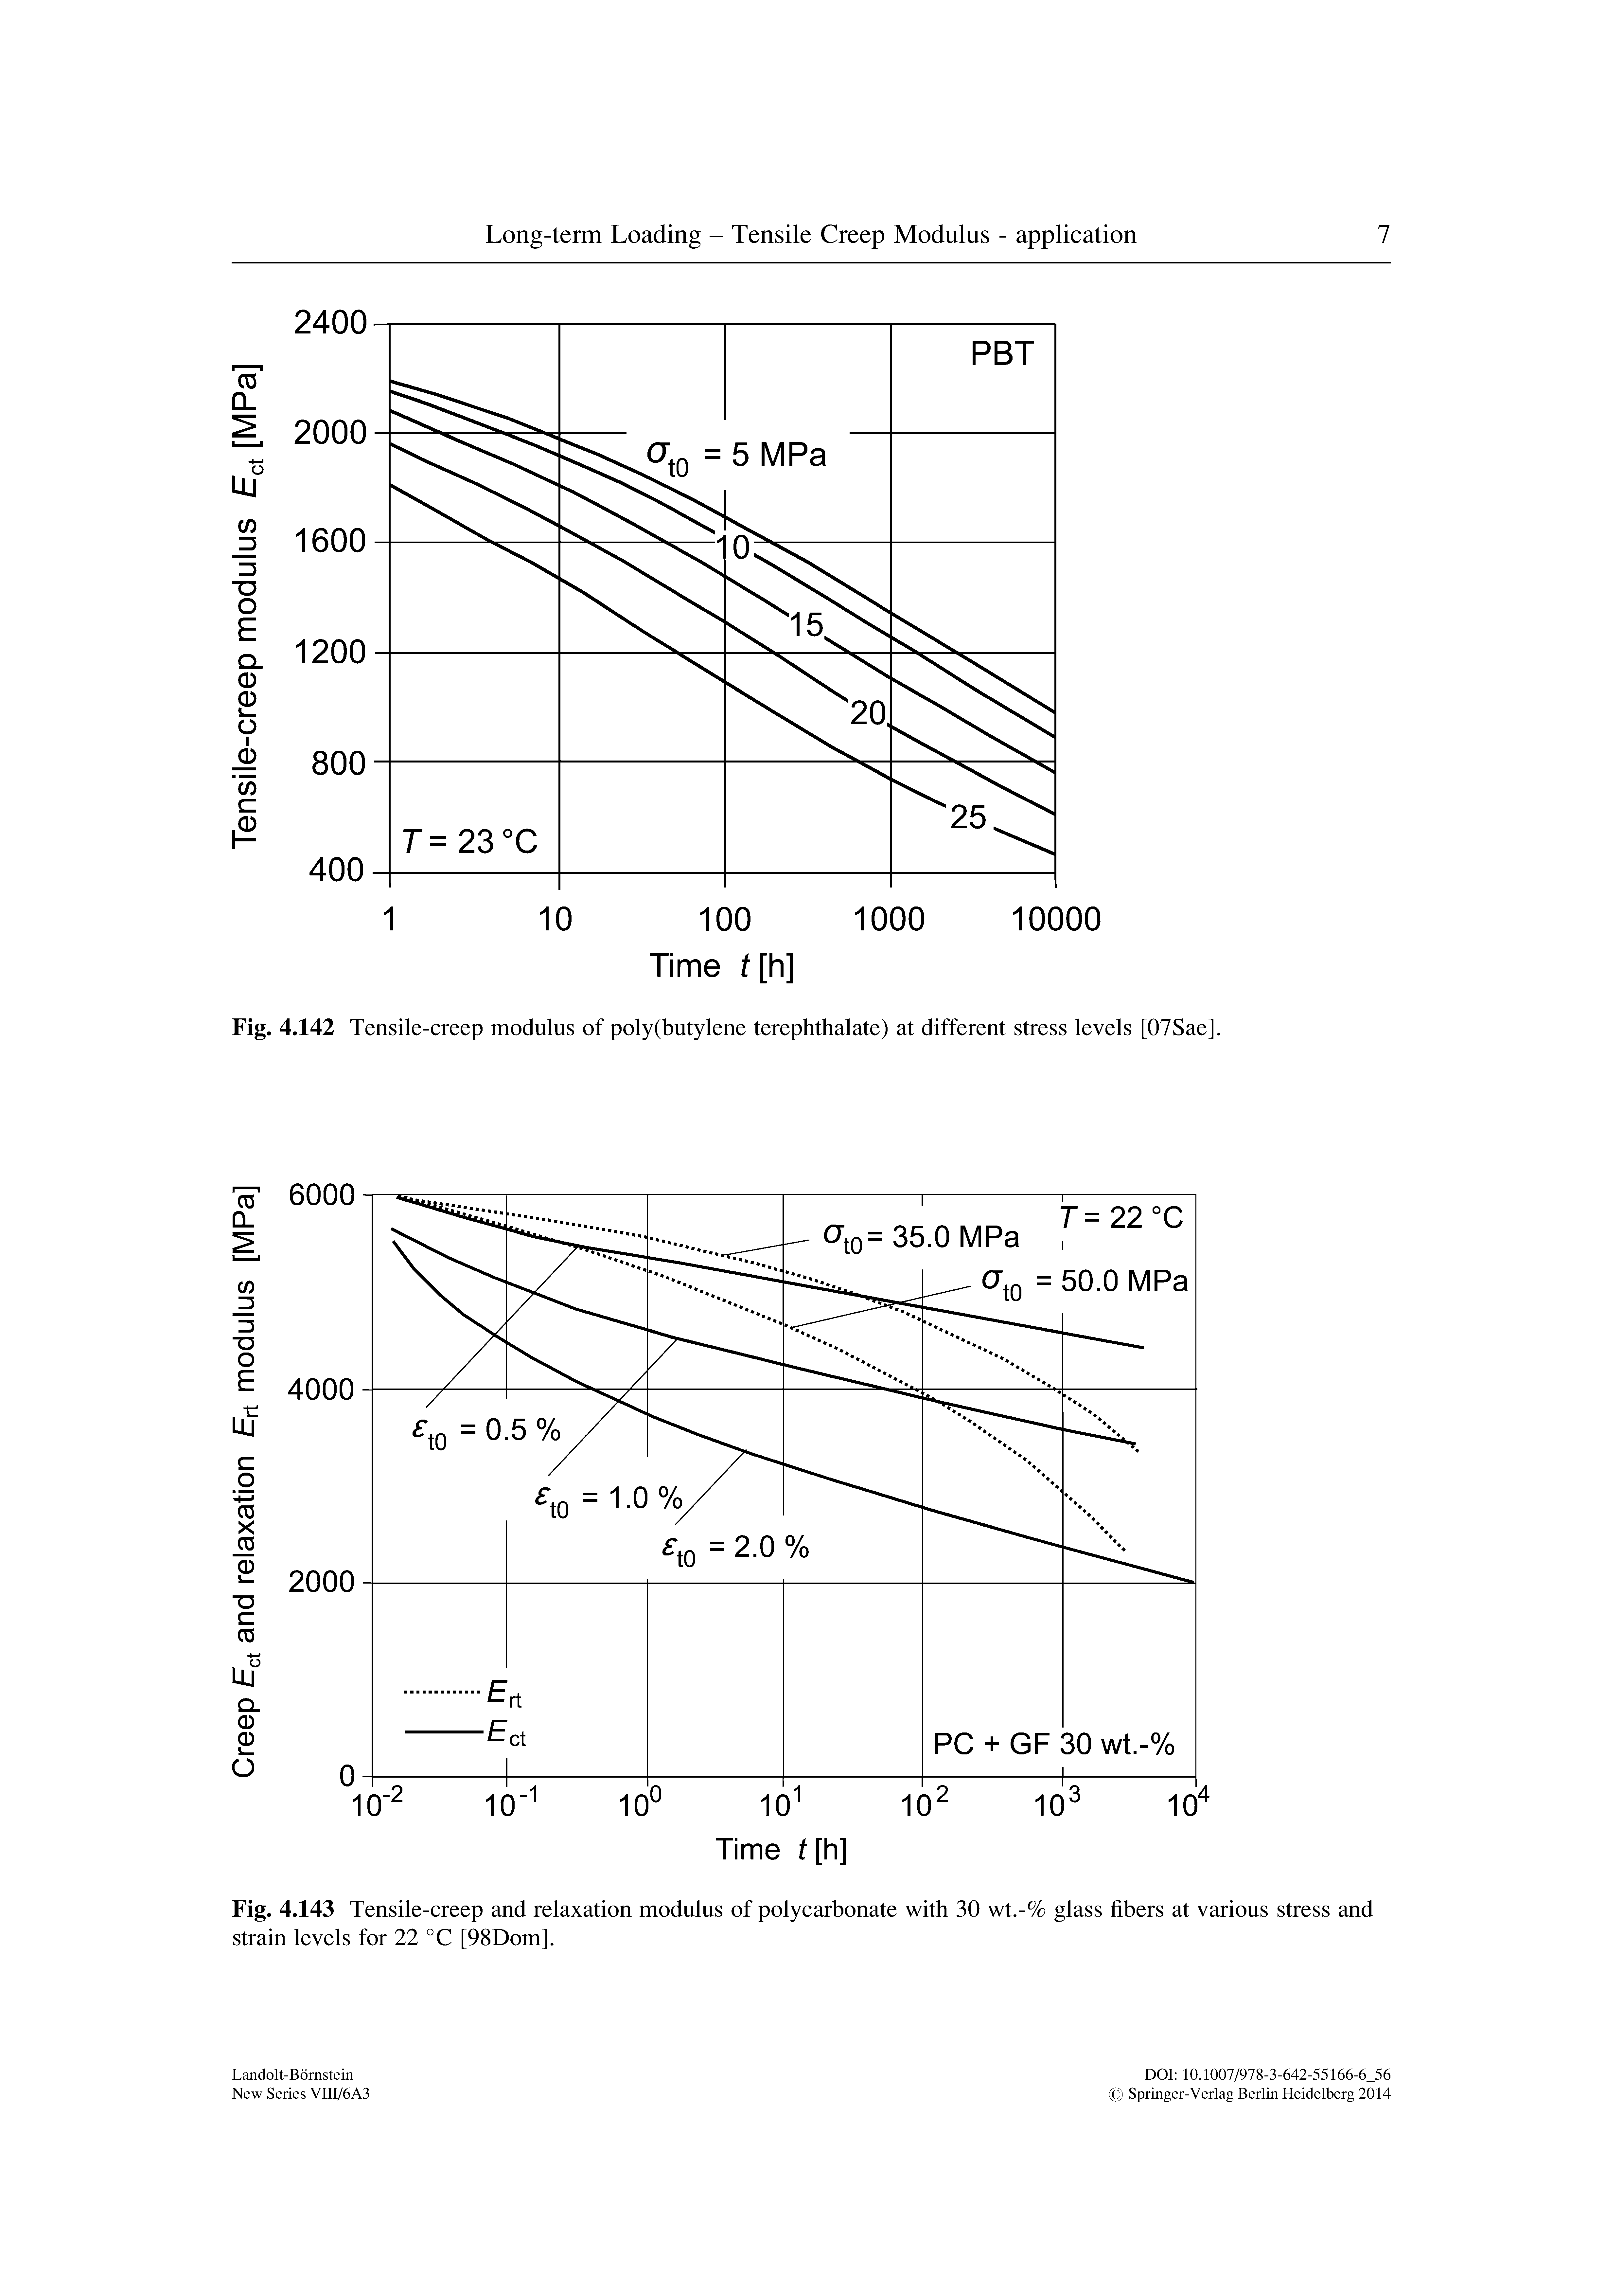 Fig. 4.143 Tensile-creep and relaxation modulus of polycarbonate with 30 wt.-% glass fibers at various stress and strain levels for 22 °C [98Dom].